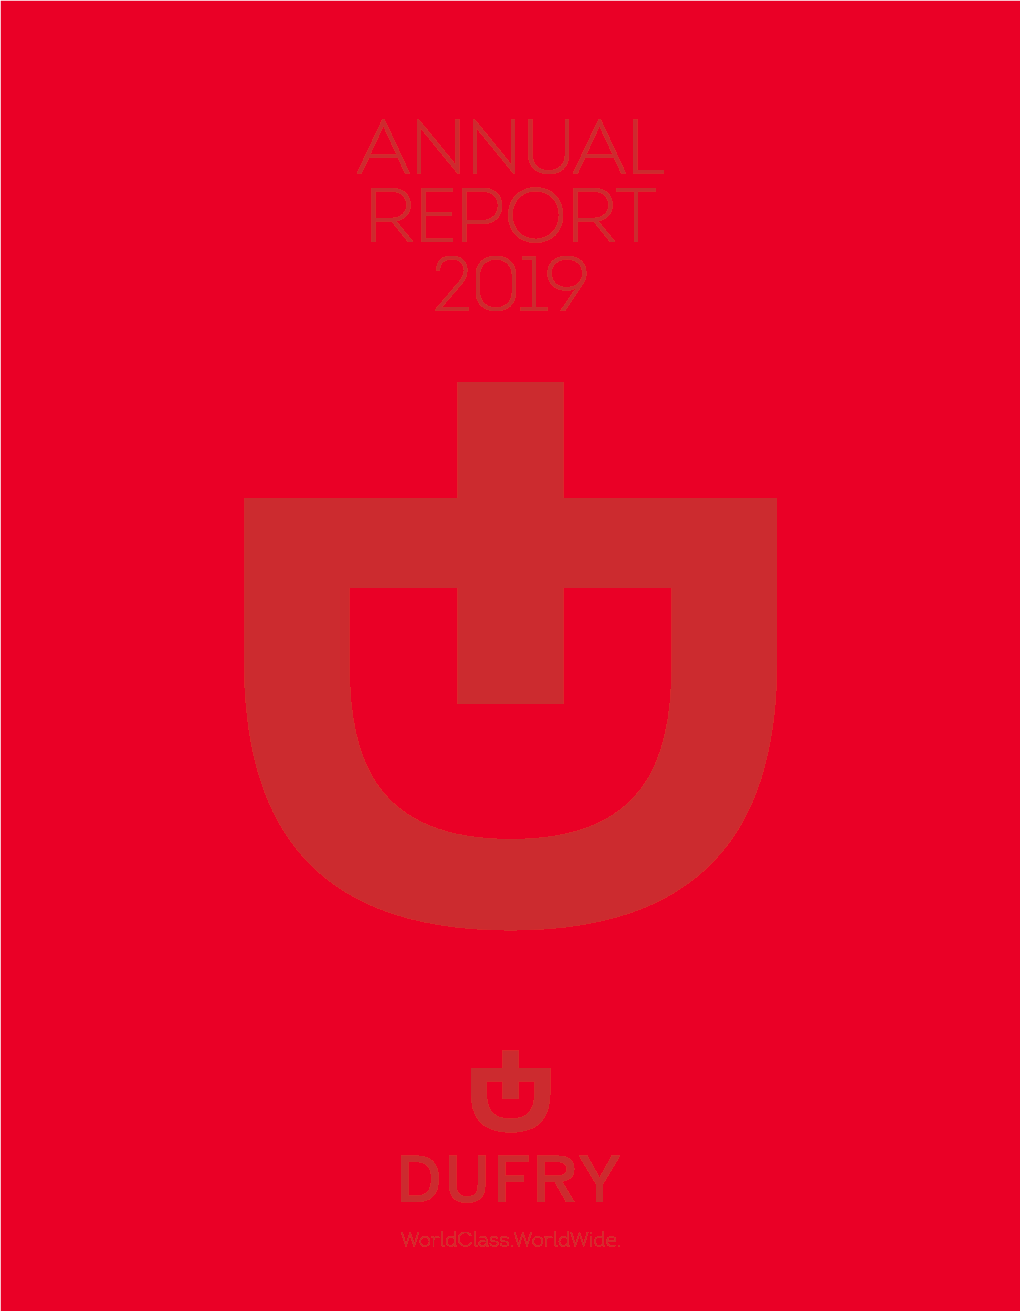 Annual Report 2019 Dufry Group – a Leading Global Travel Retailer